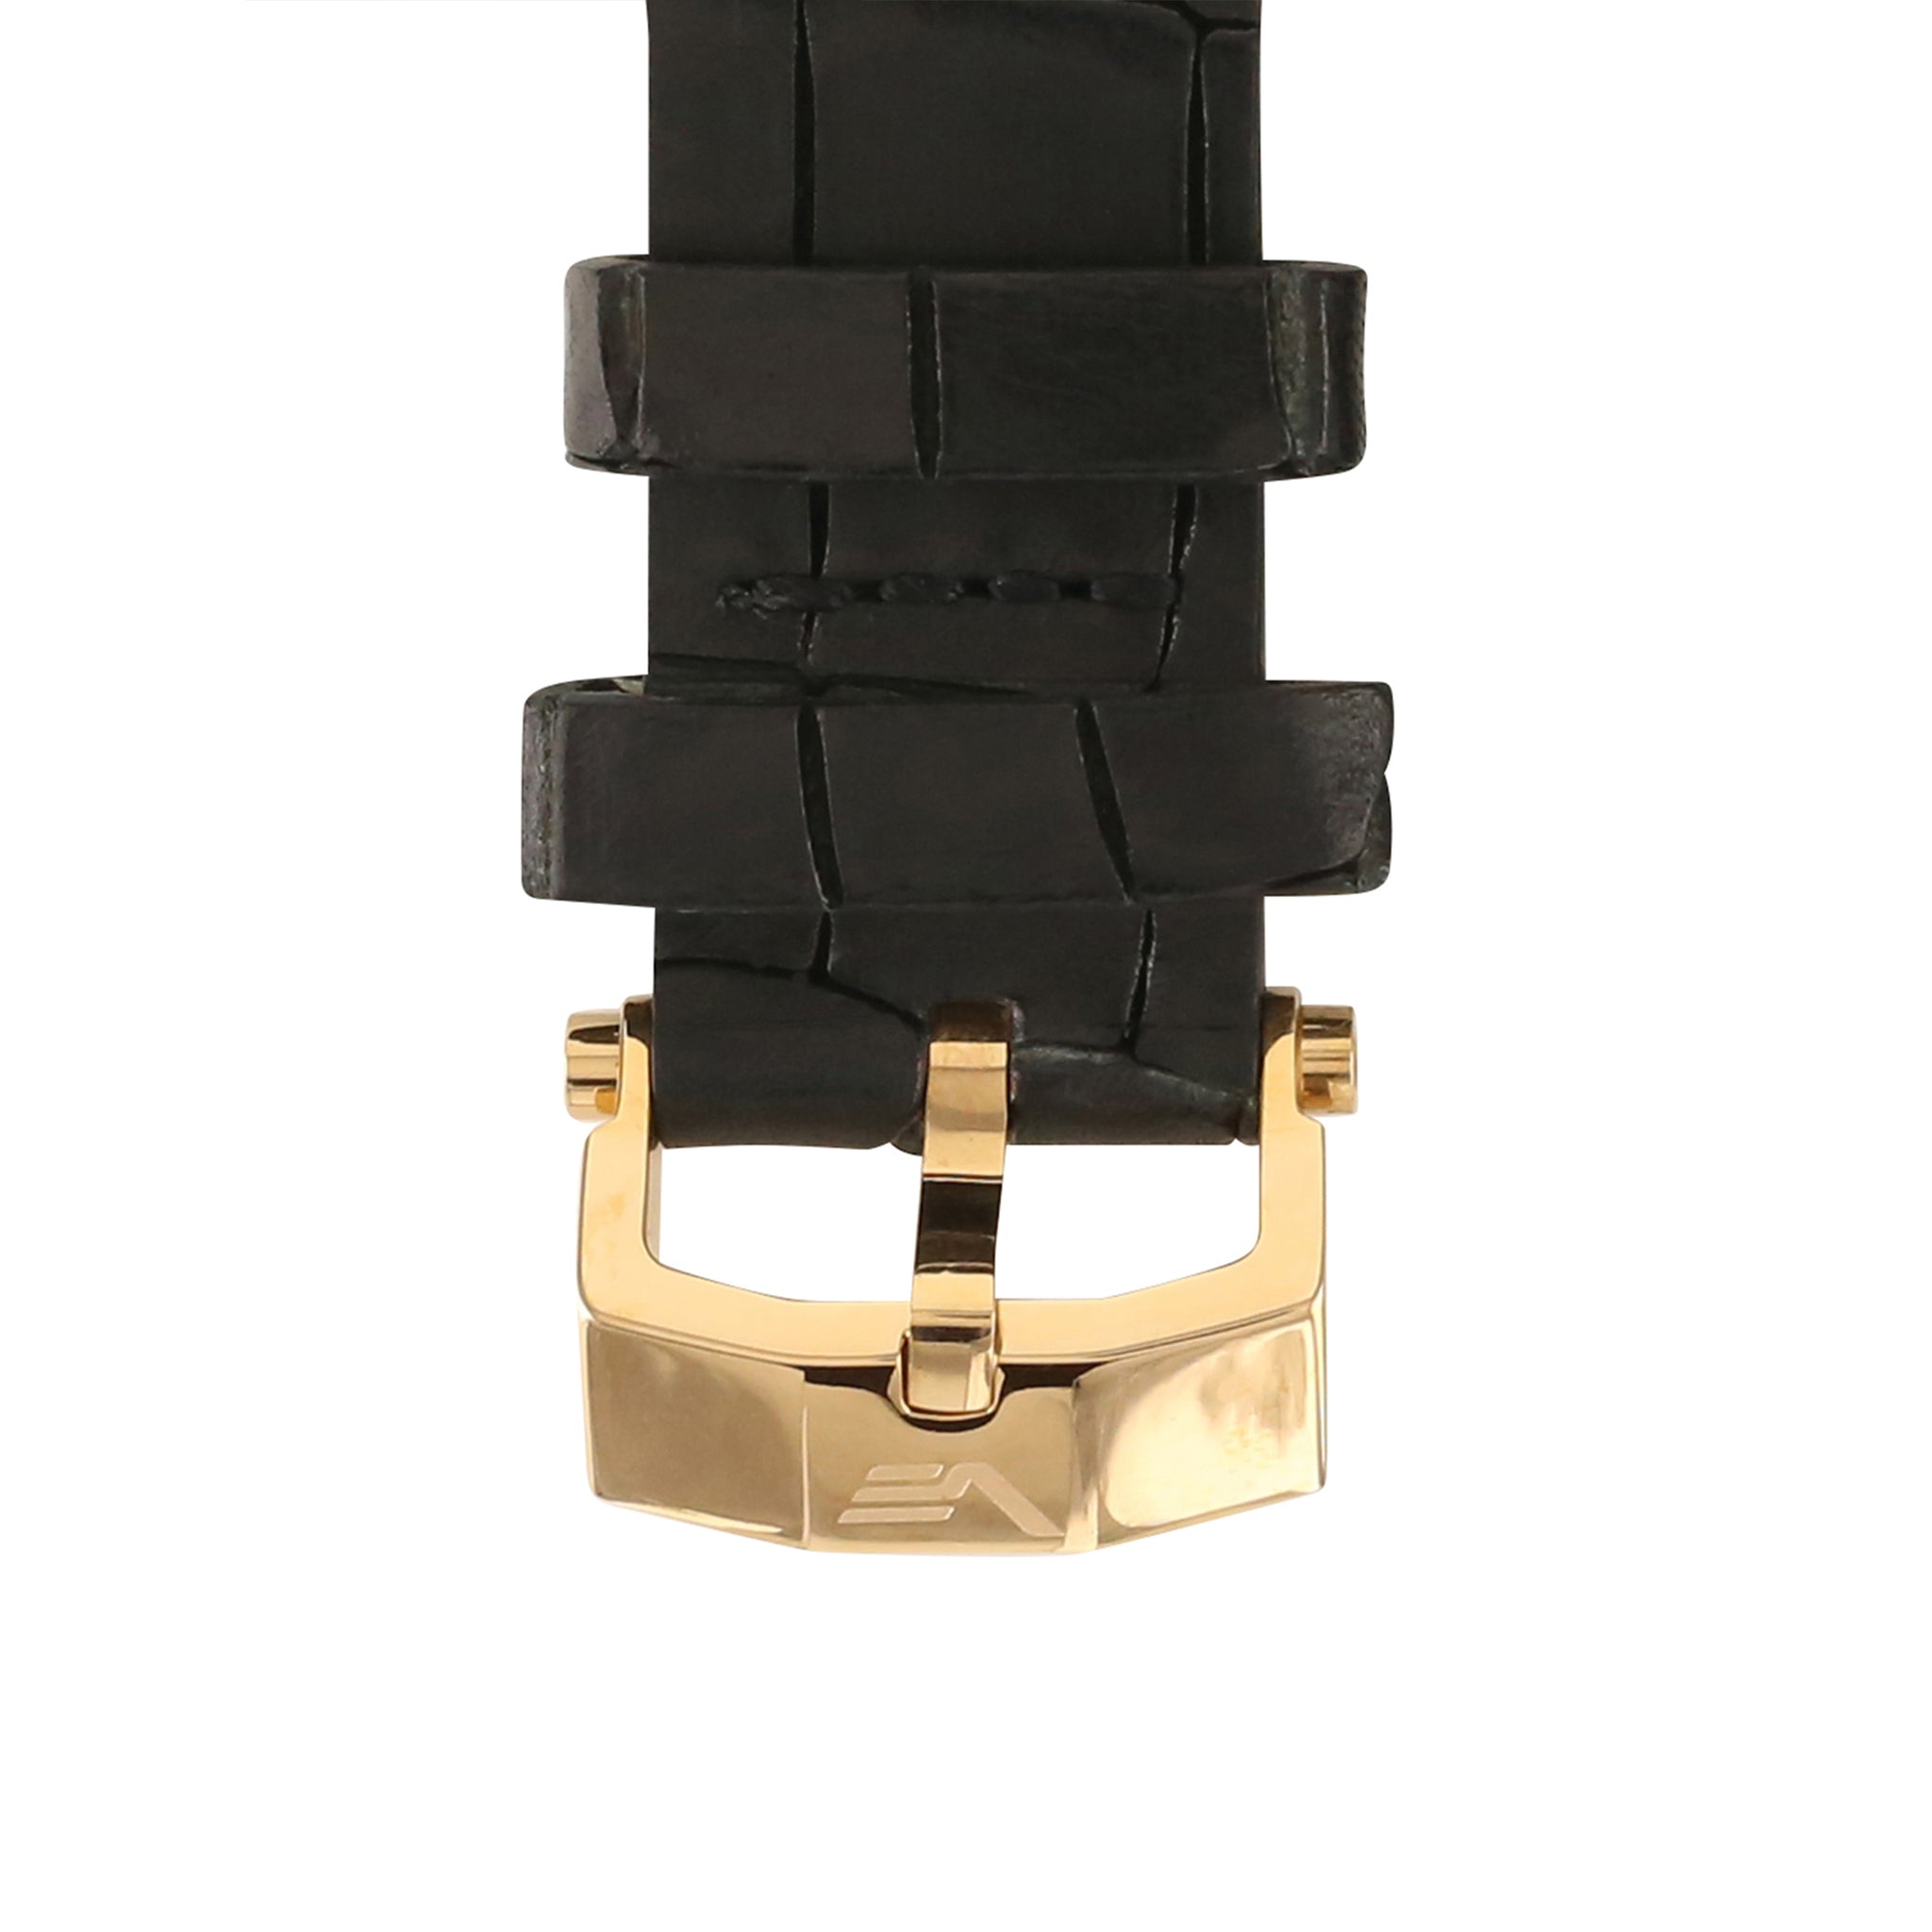 ENERGIA BLACK CROC LEATHER 26mm - GOLD BUCKLE